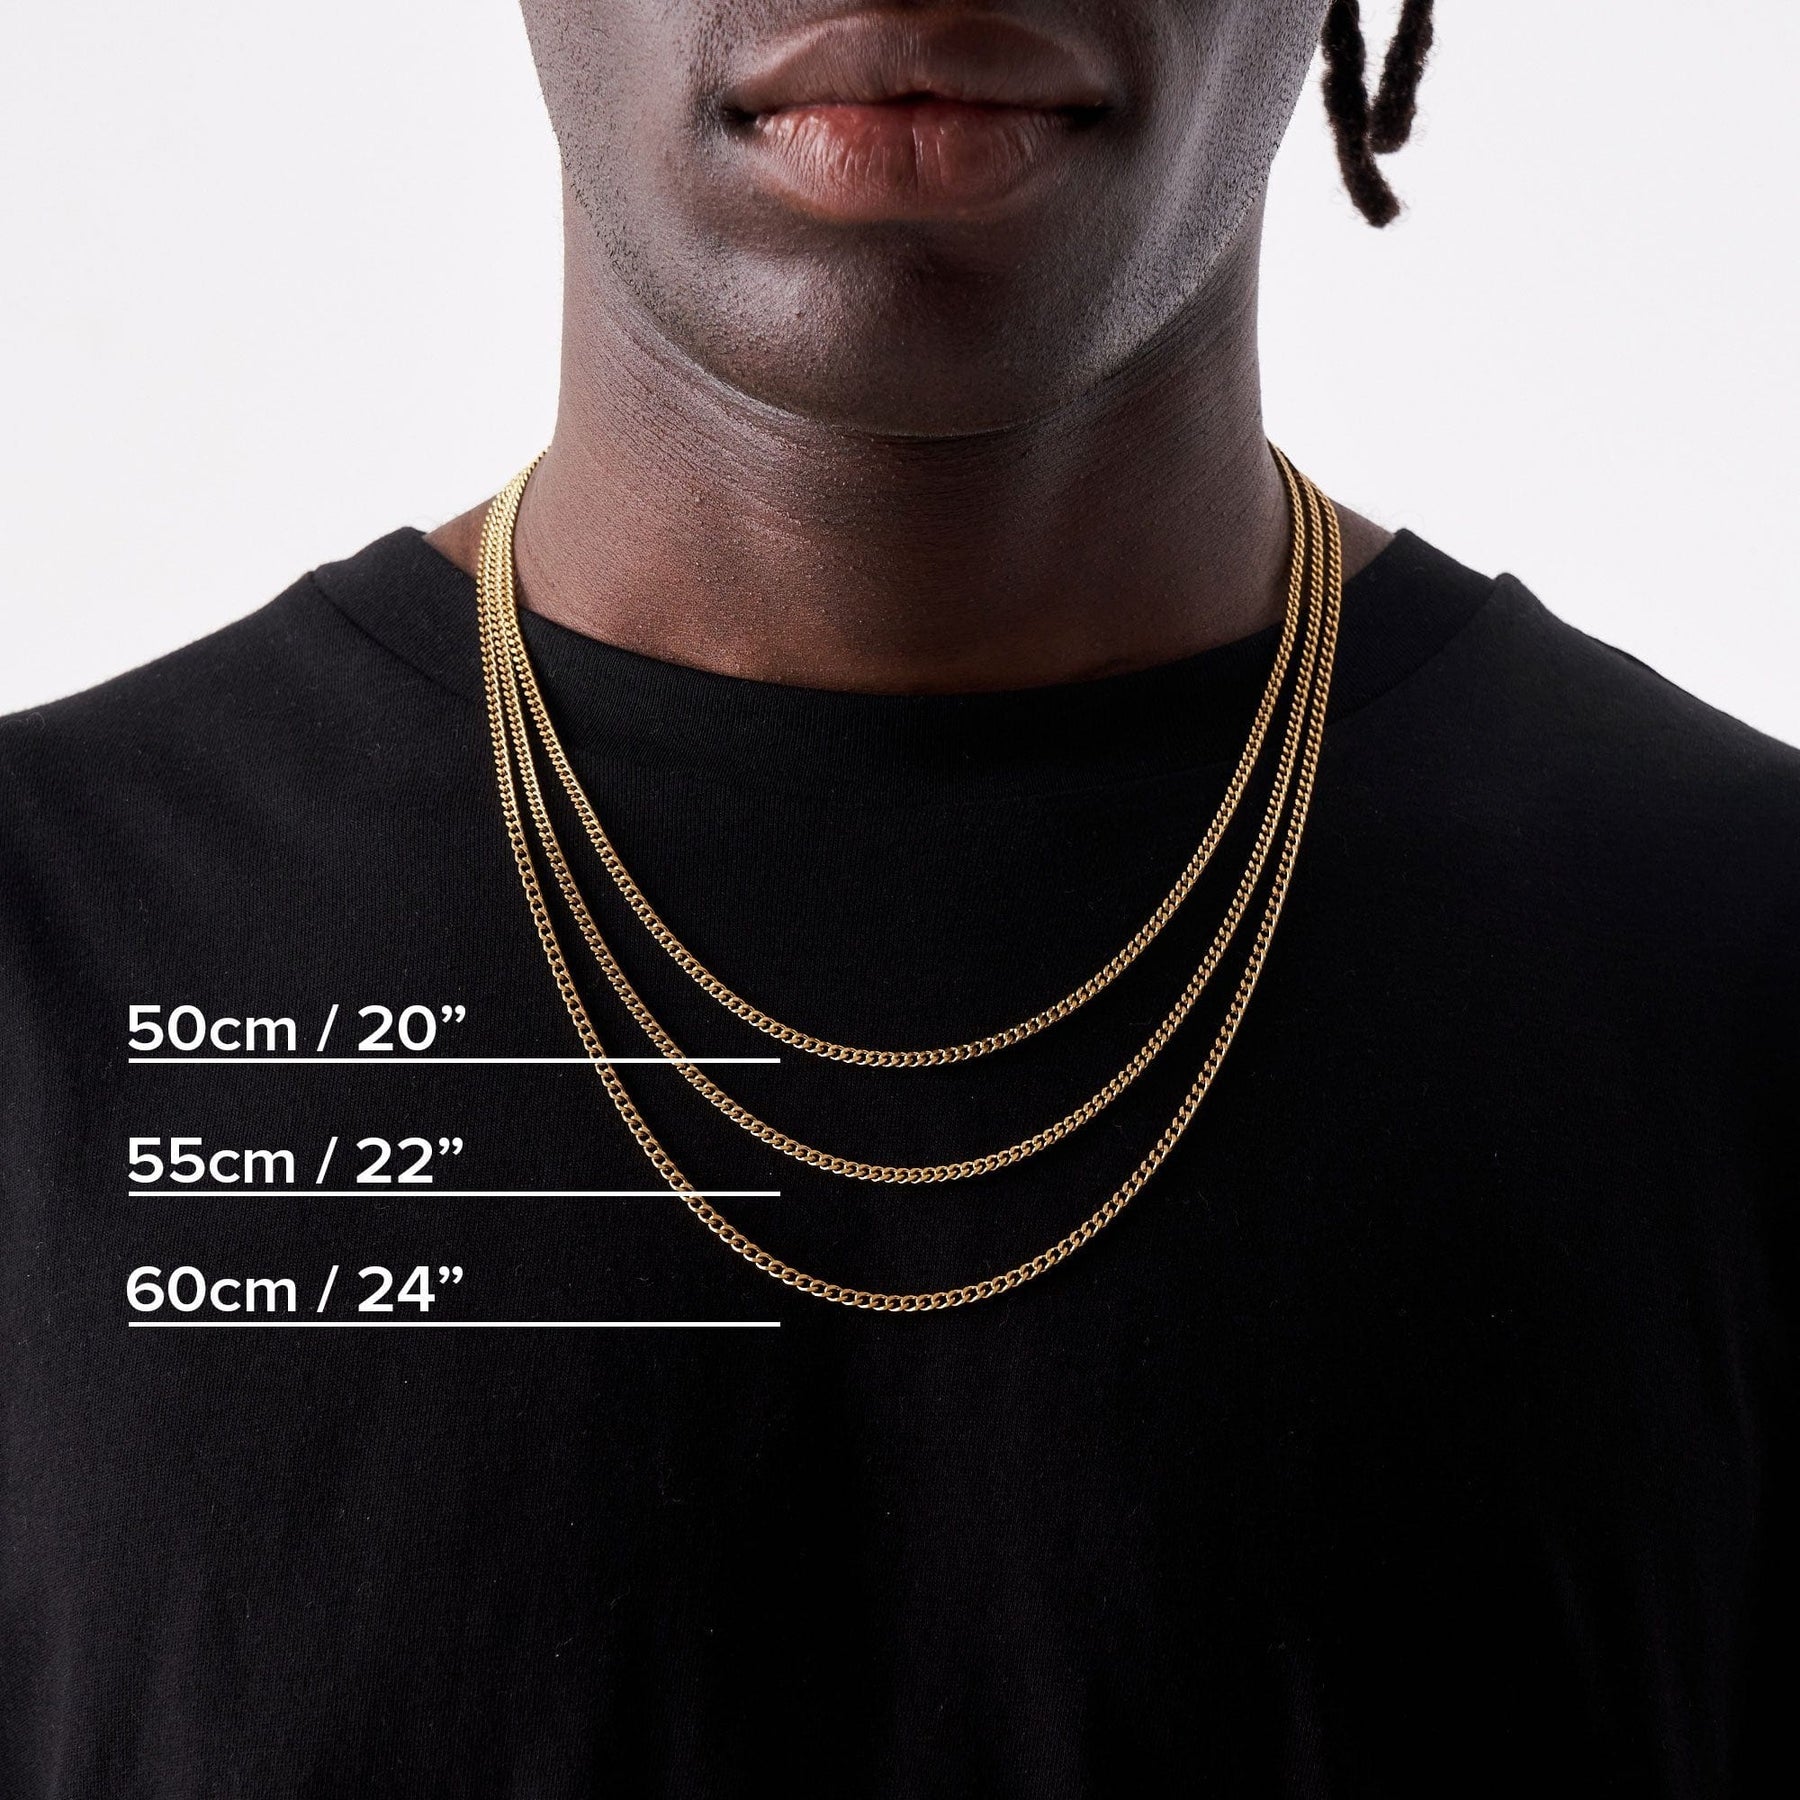 Men S Chain Necklace Stainless Steel Jewelry On The Neck Chain Male Personality Hip Hop Necklace Fashion Accesories For Men Store Naacpatlanta Org